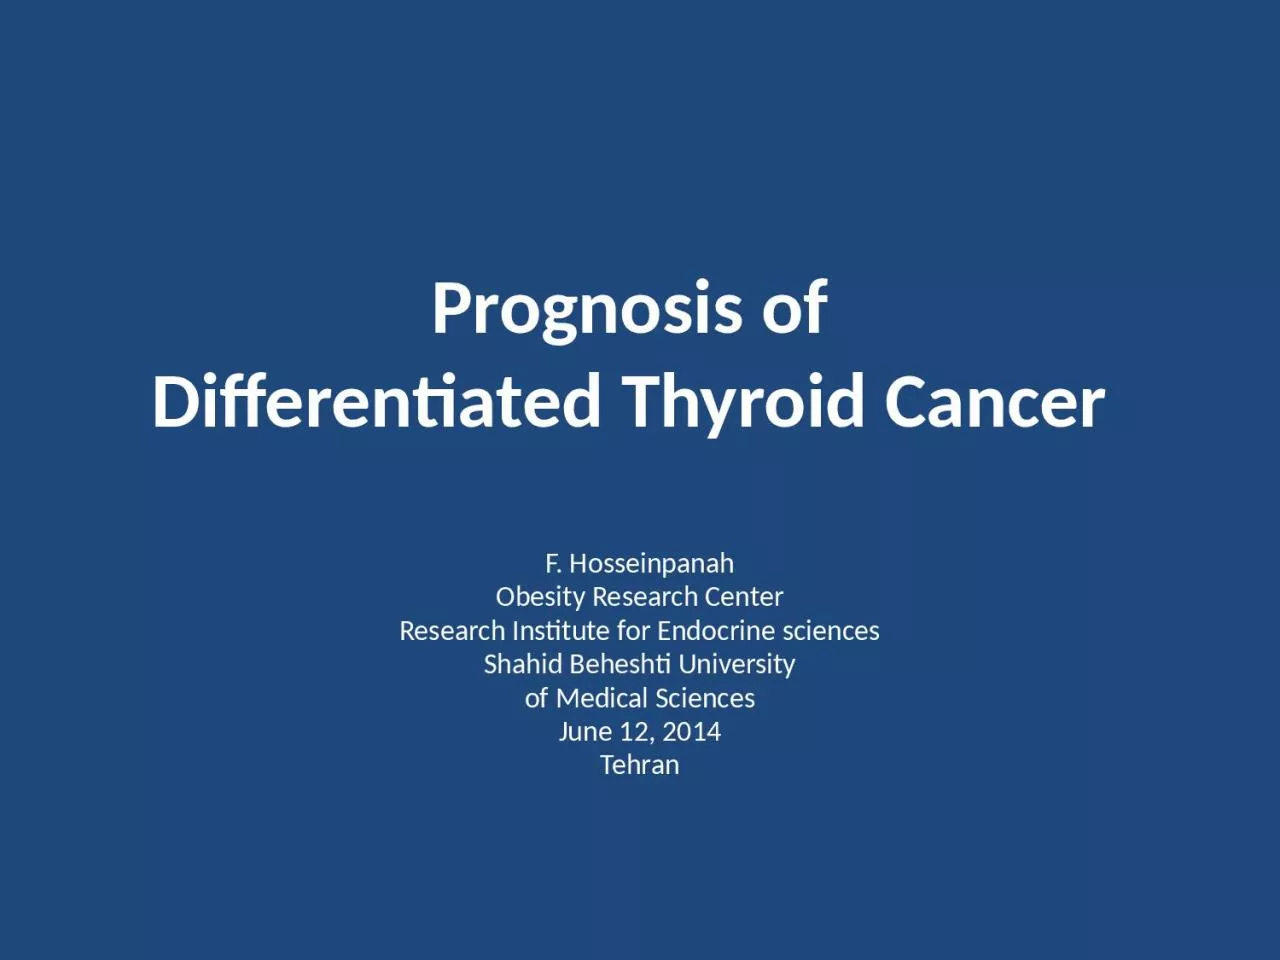 Prognosis of Differentiated Thyroid Cancer